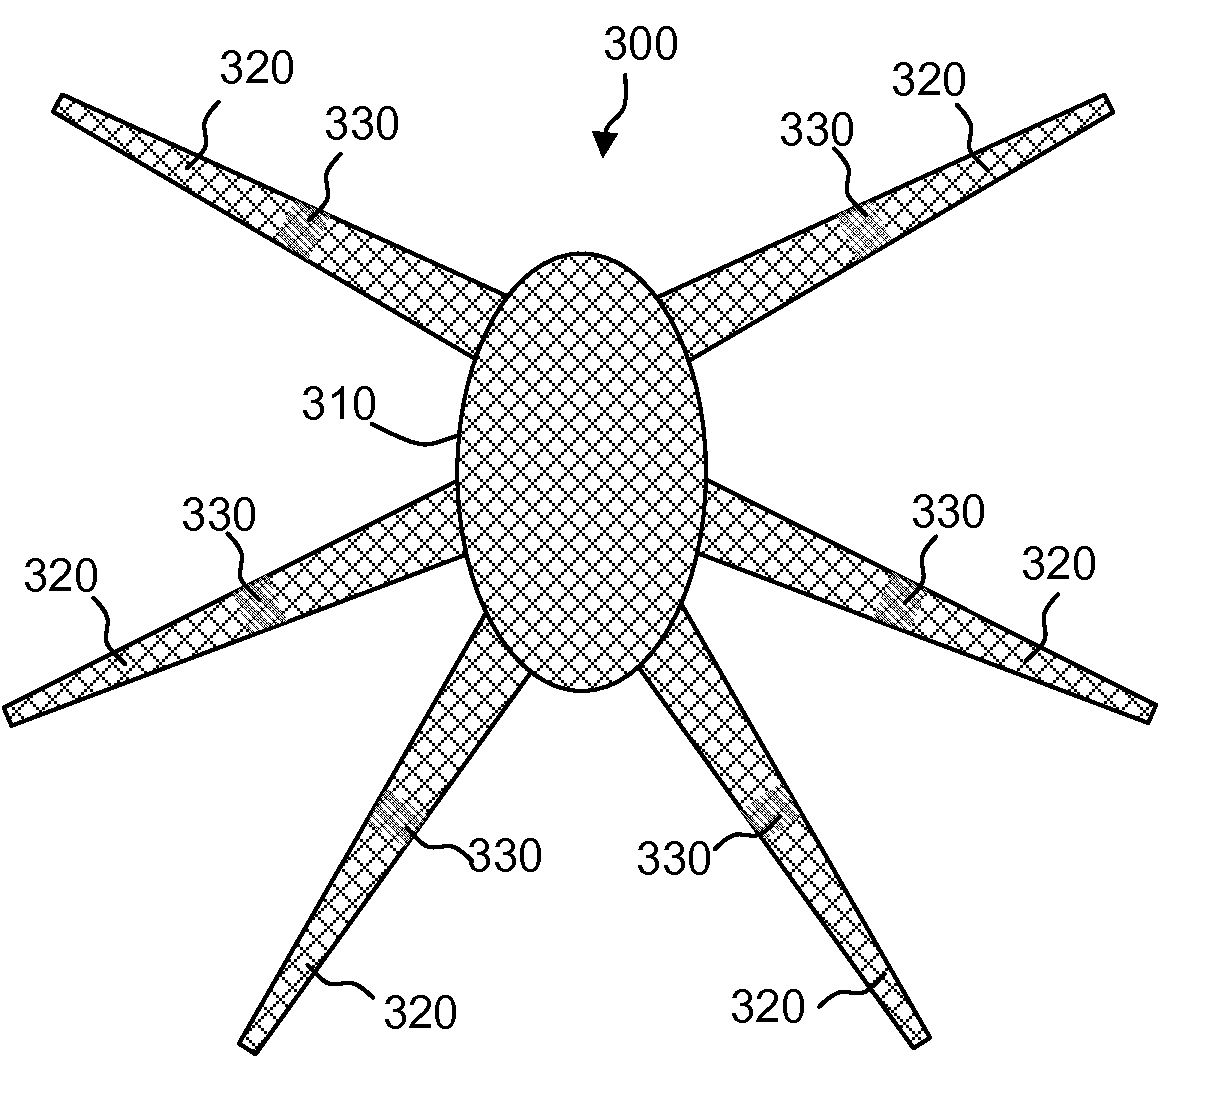 Surgical meshes with radiopaque coatings